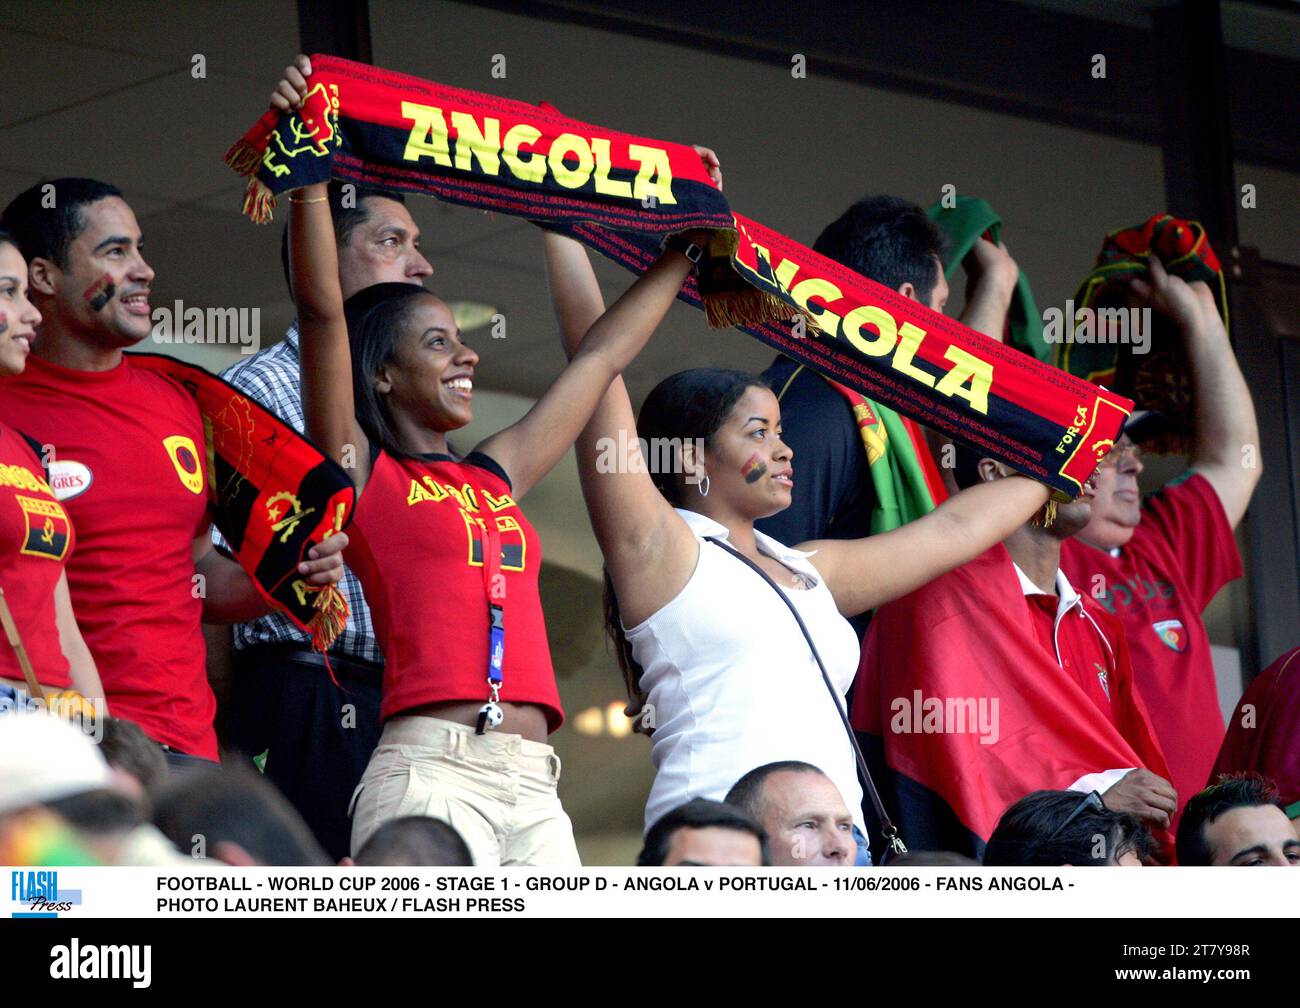 FOOTBALL - WORLD CUP 2006 - STAGE 1 - GROUP D - ANGOLA v PORTUGAL - 11/06/2006 - FANS ANGOLA - PHOTO LAURENT BAHEUX / FLASH PRESS Stock Photo